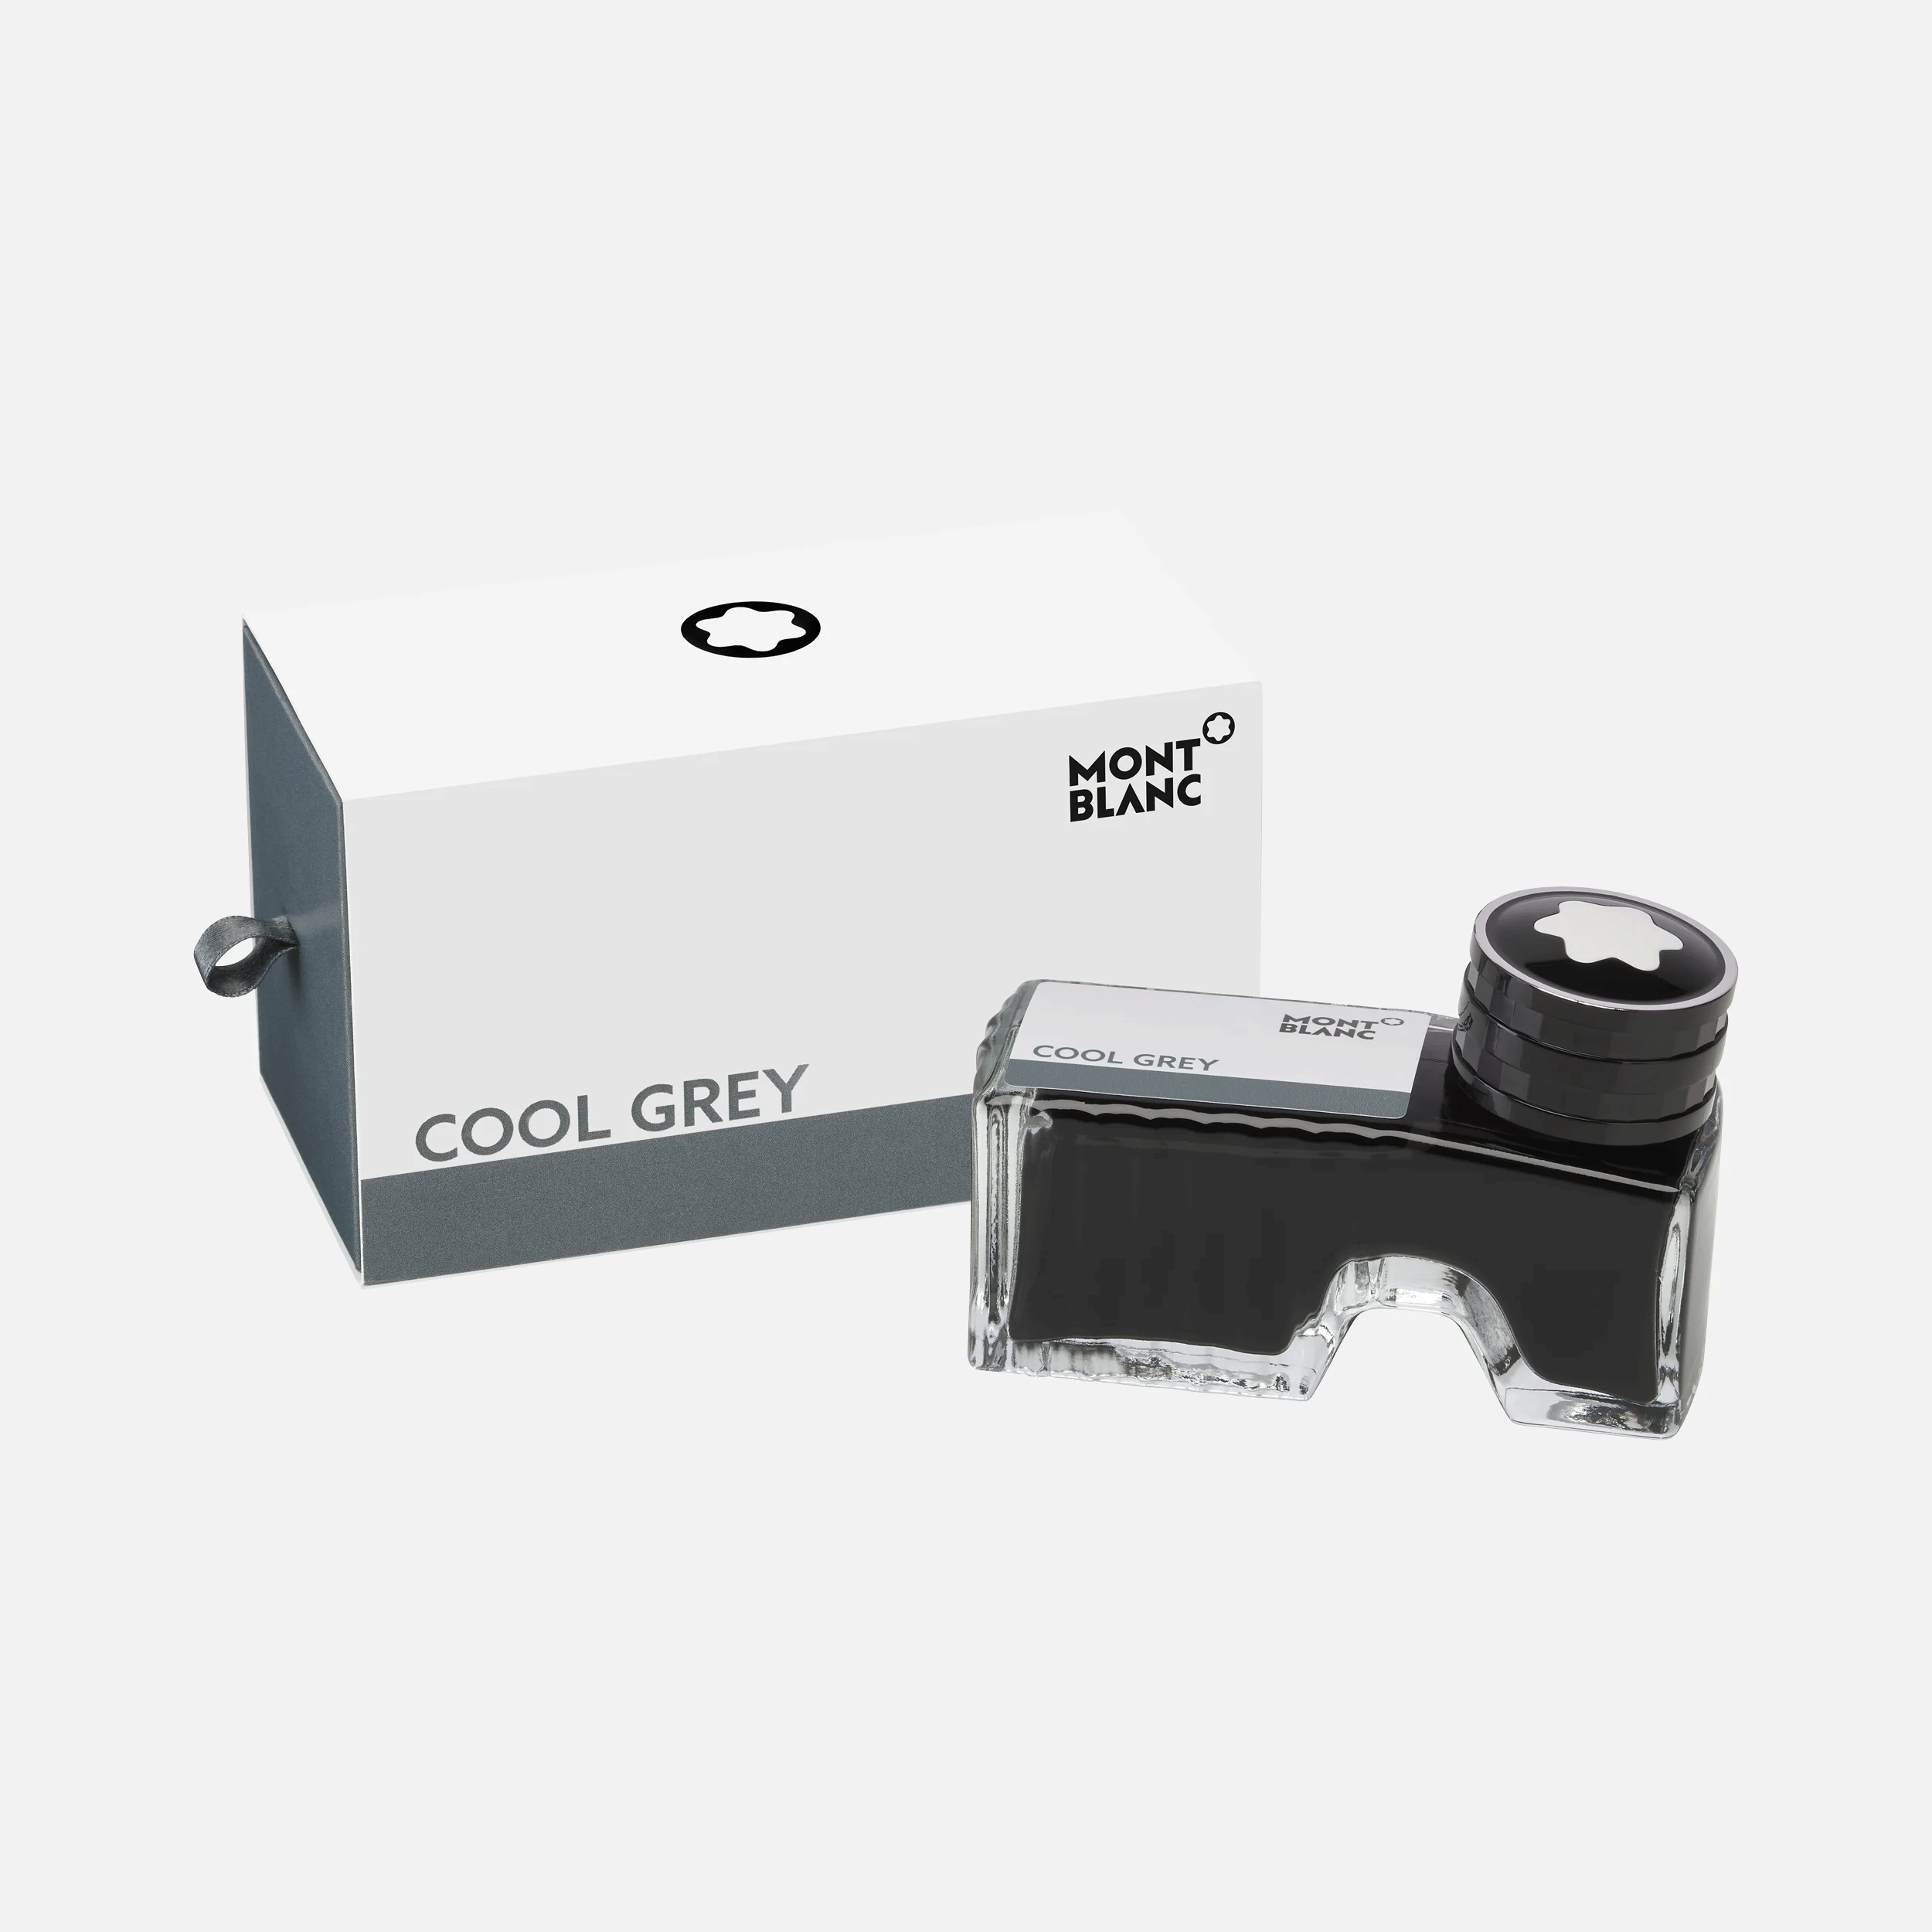 Montblanc Ink Bottle 60ml Cool Grey - Pencraft the boutique